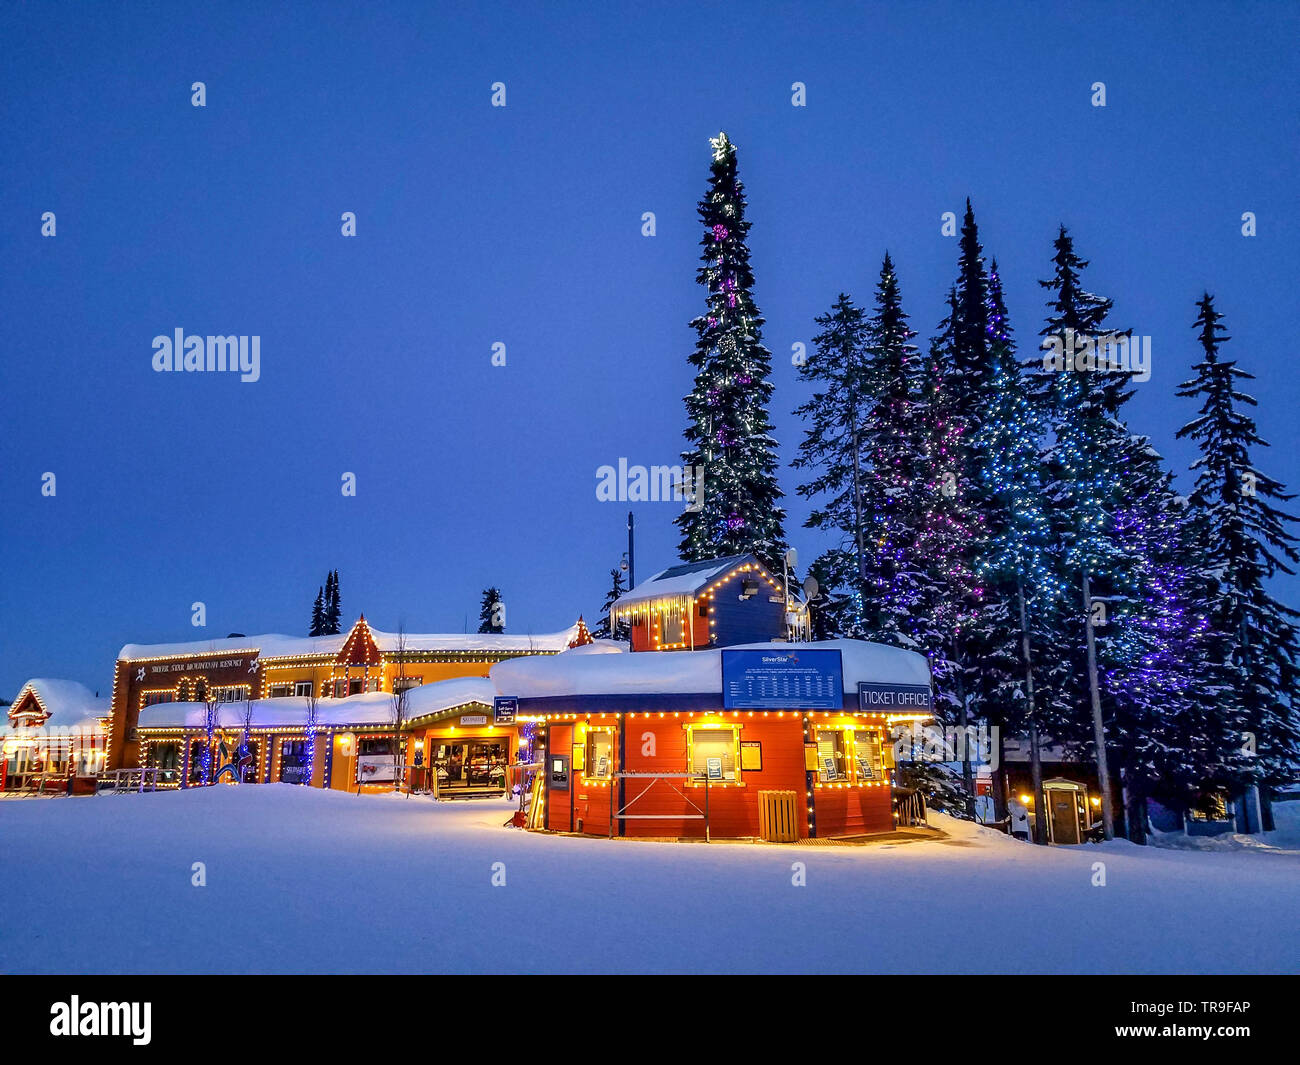 Main village of Silver Star Mountain at night in British Columbia, Canada. Stock Photo